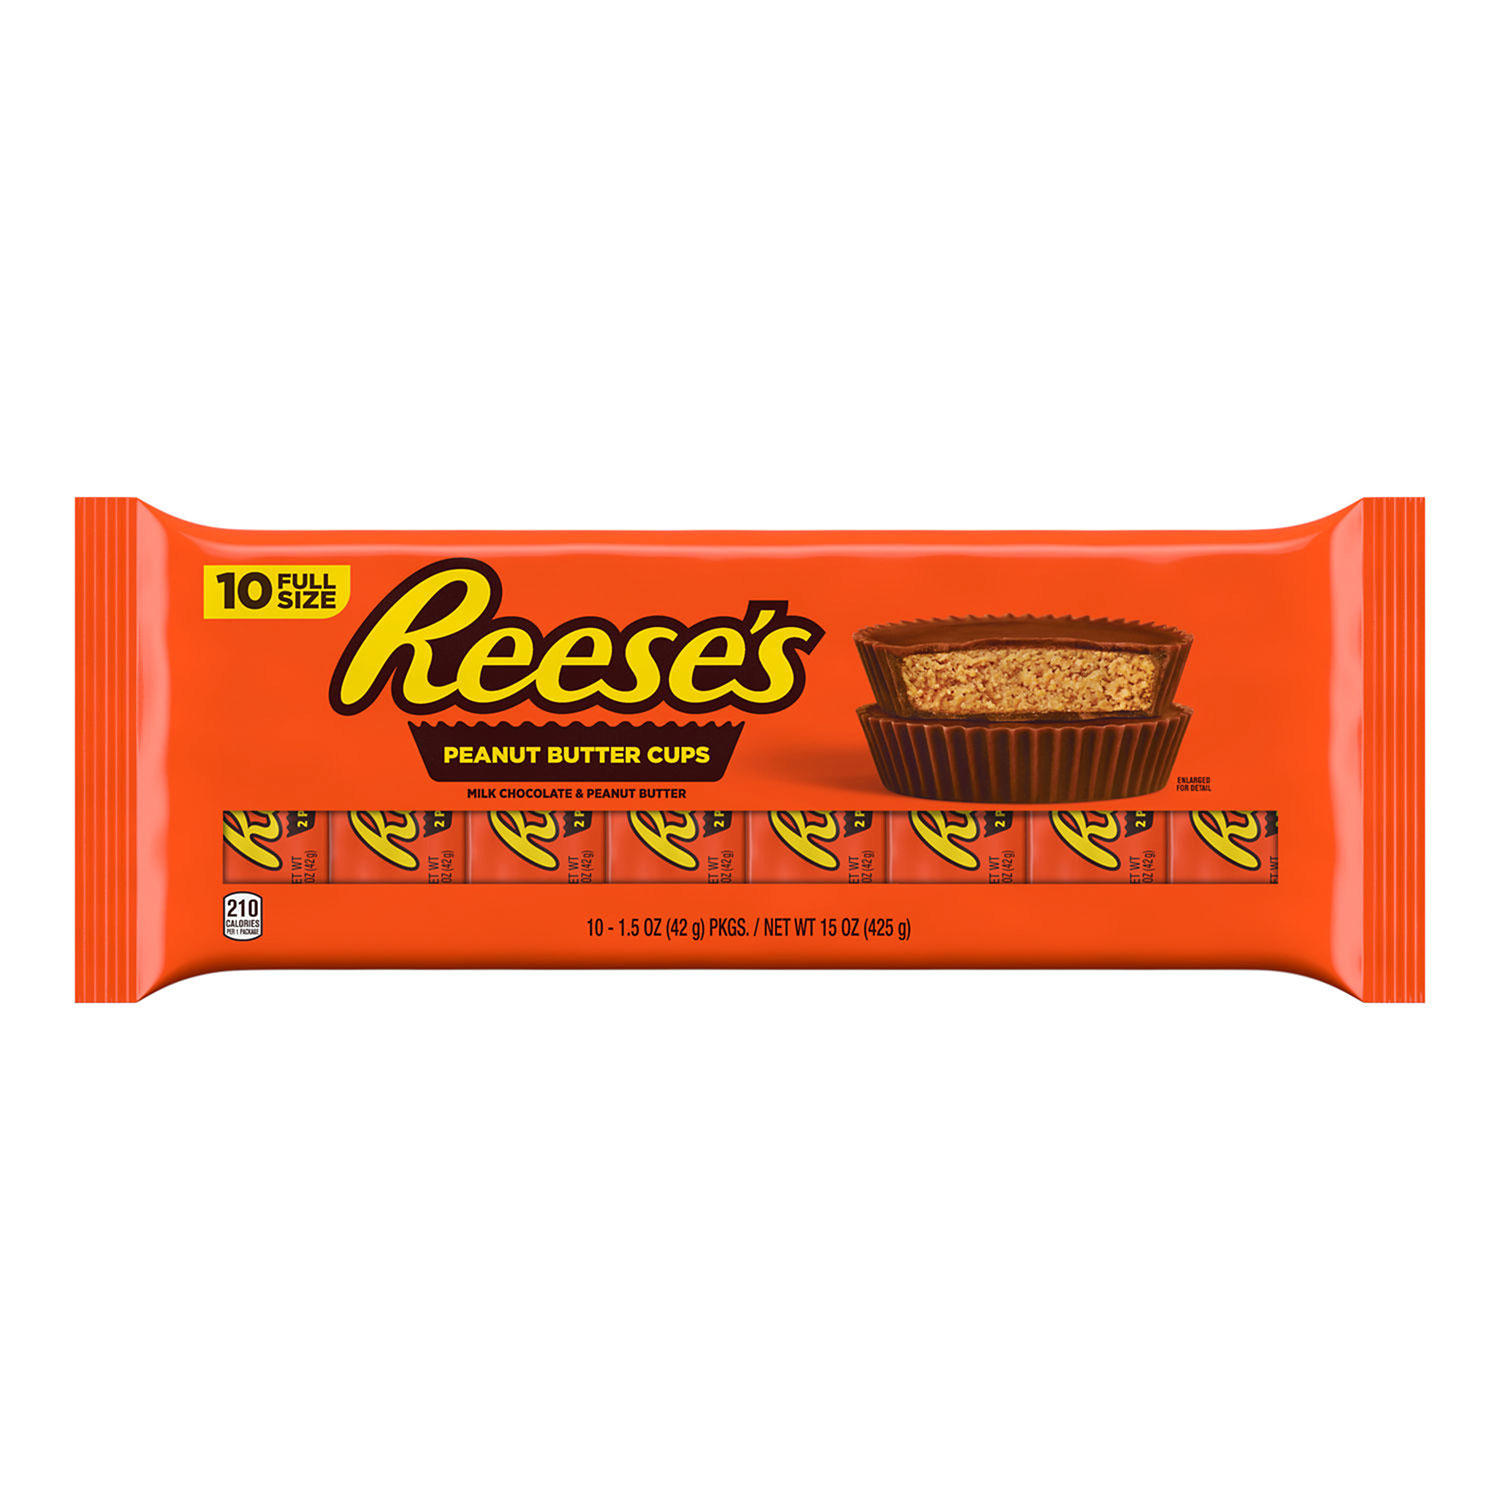 REESE'S Milk Chocolate Peanut Butter Cups, Full Size, 1.5 oz, 10 pk.